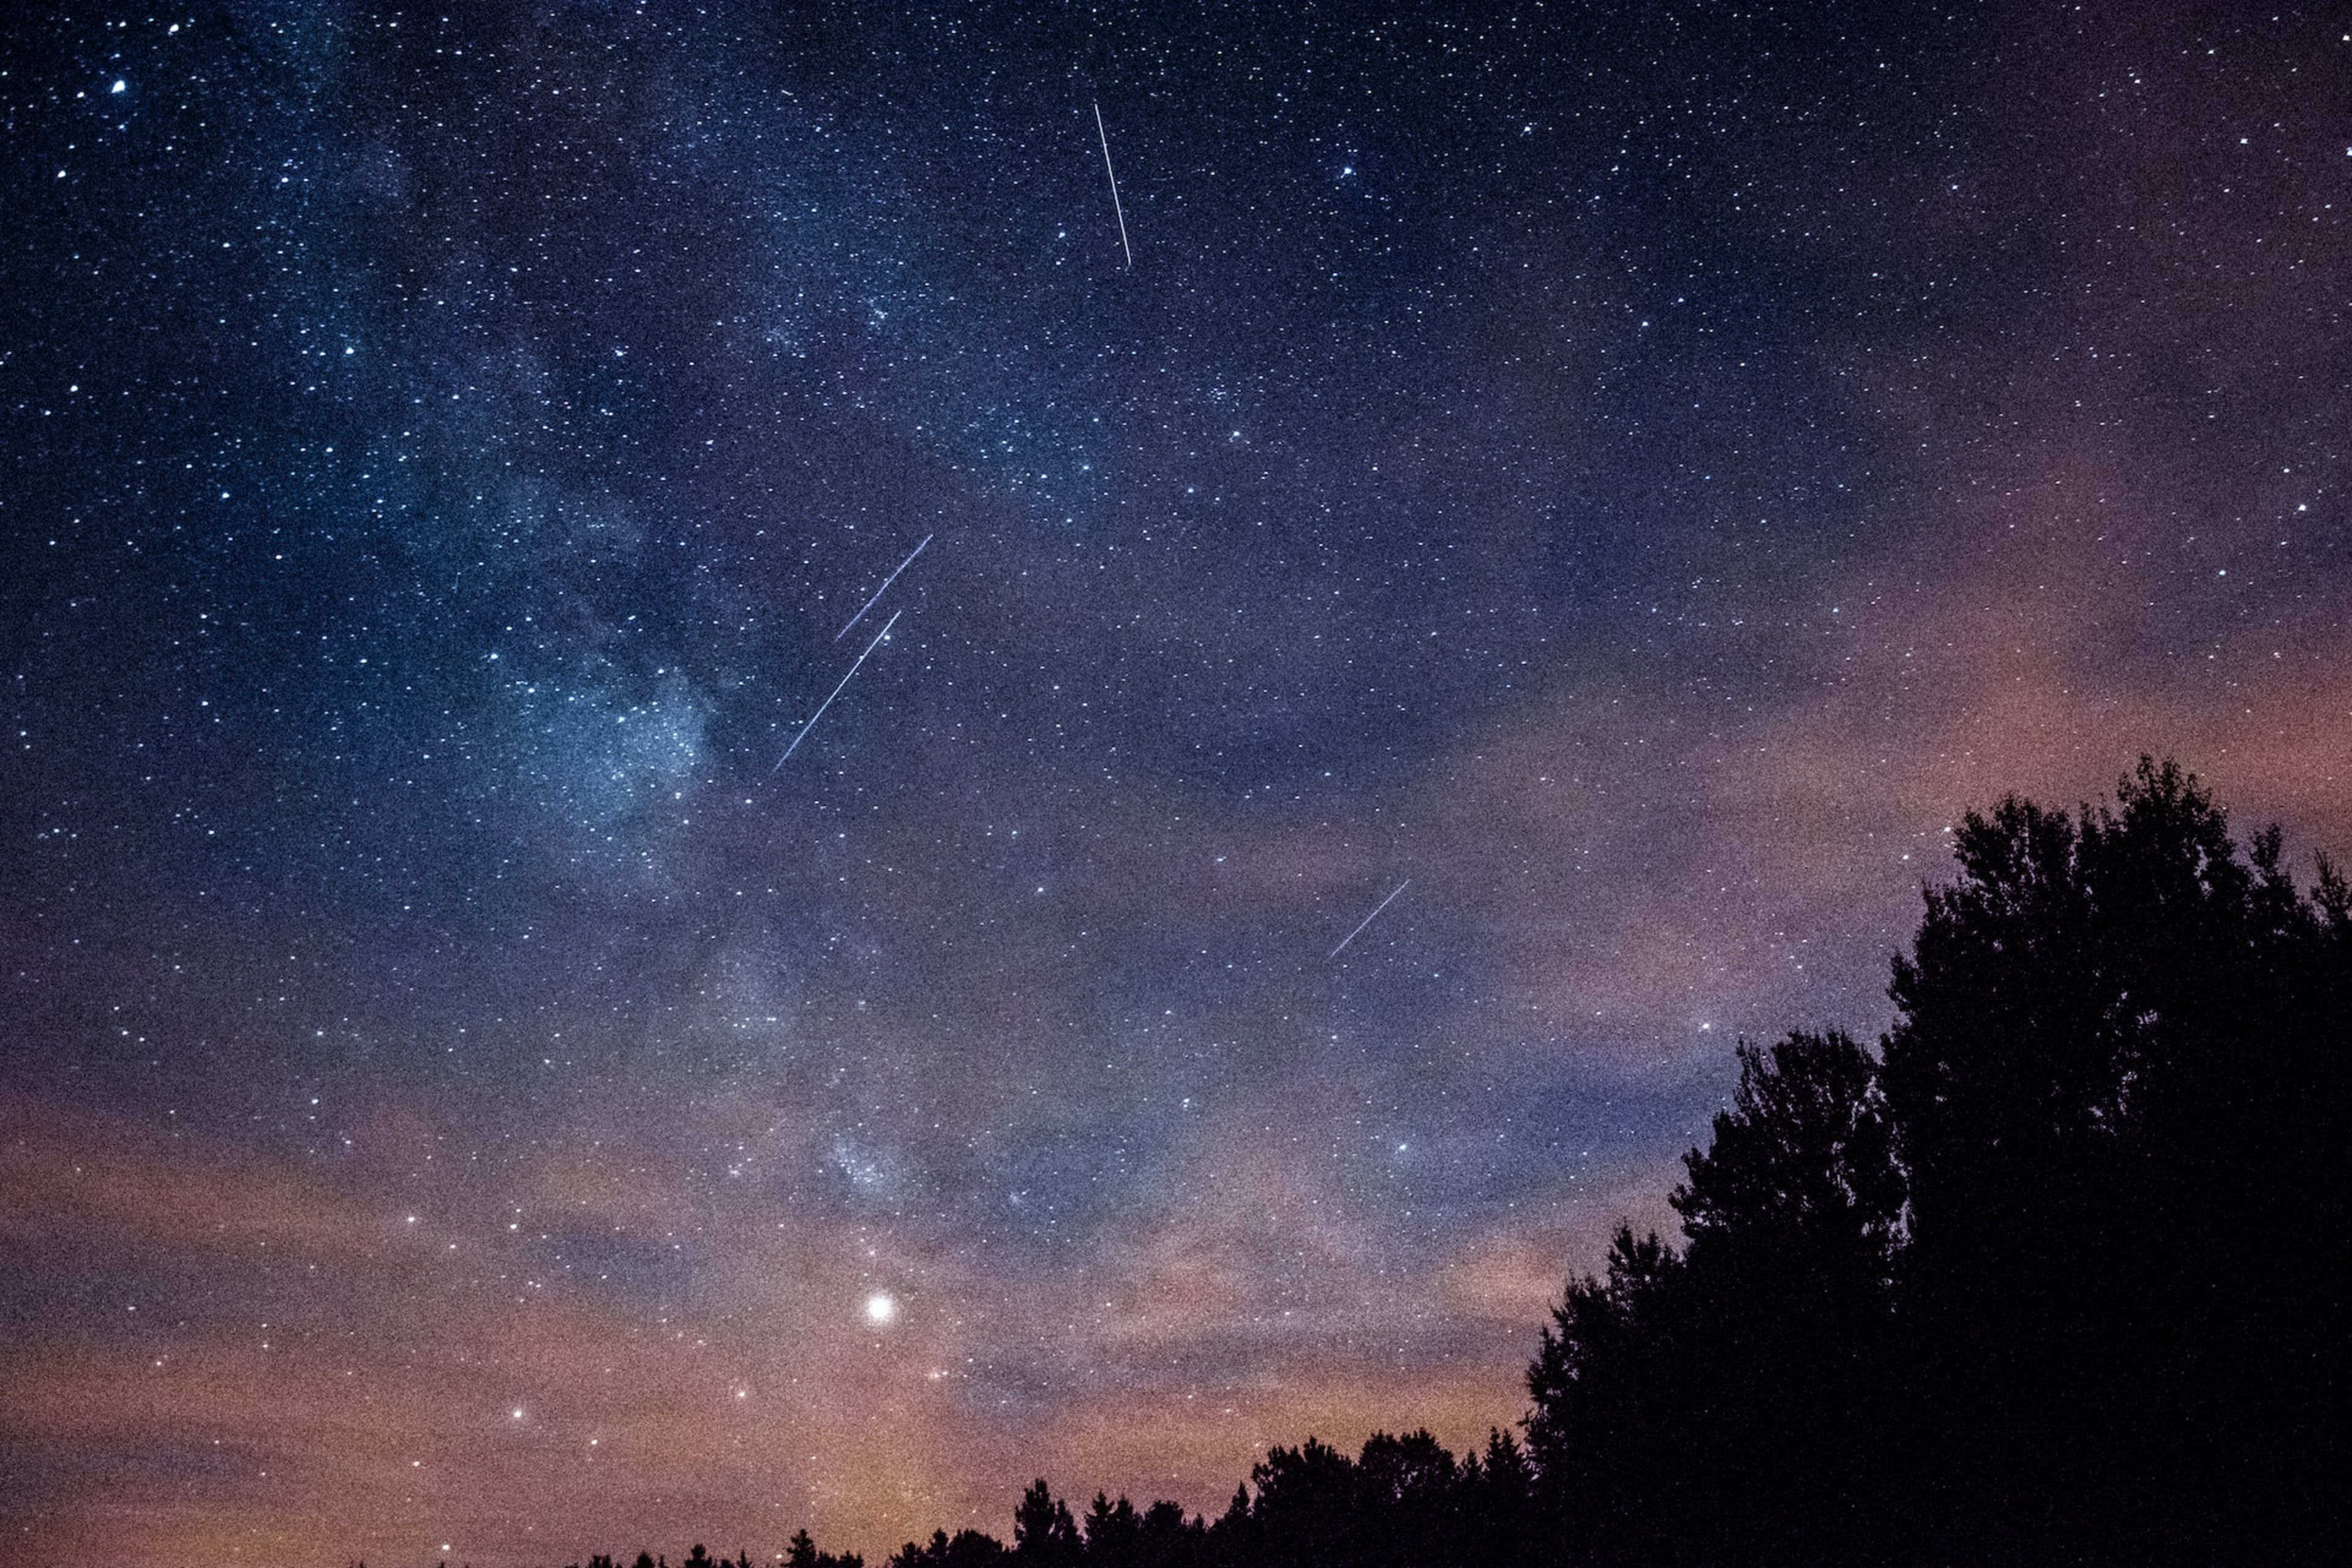 10 Best Camping Spots to See the Perseid Meteor Shower